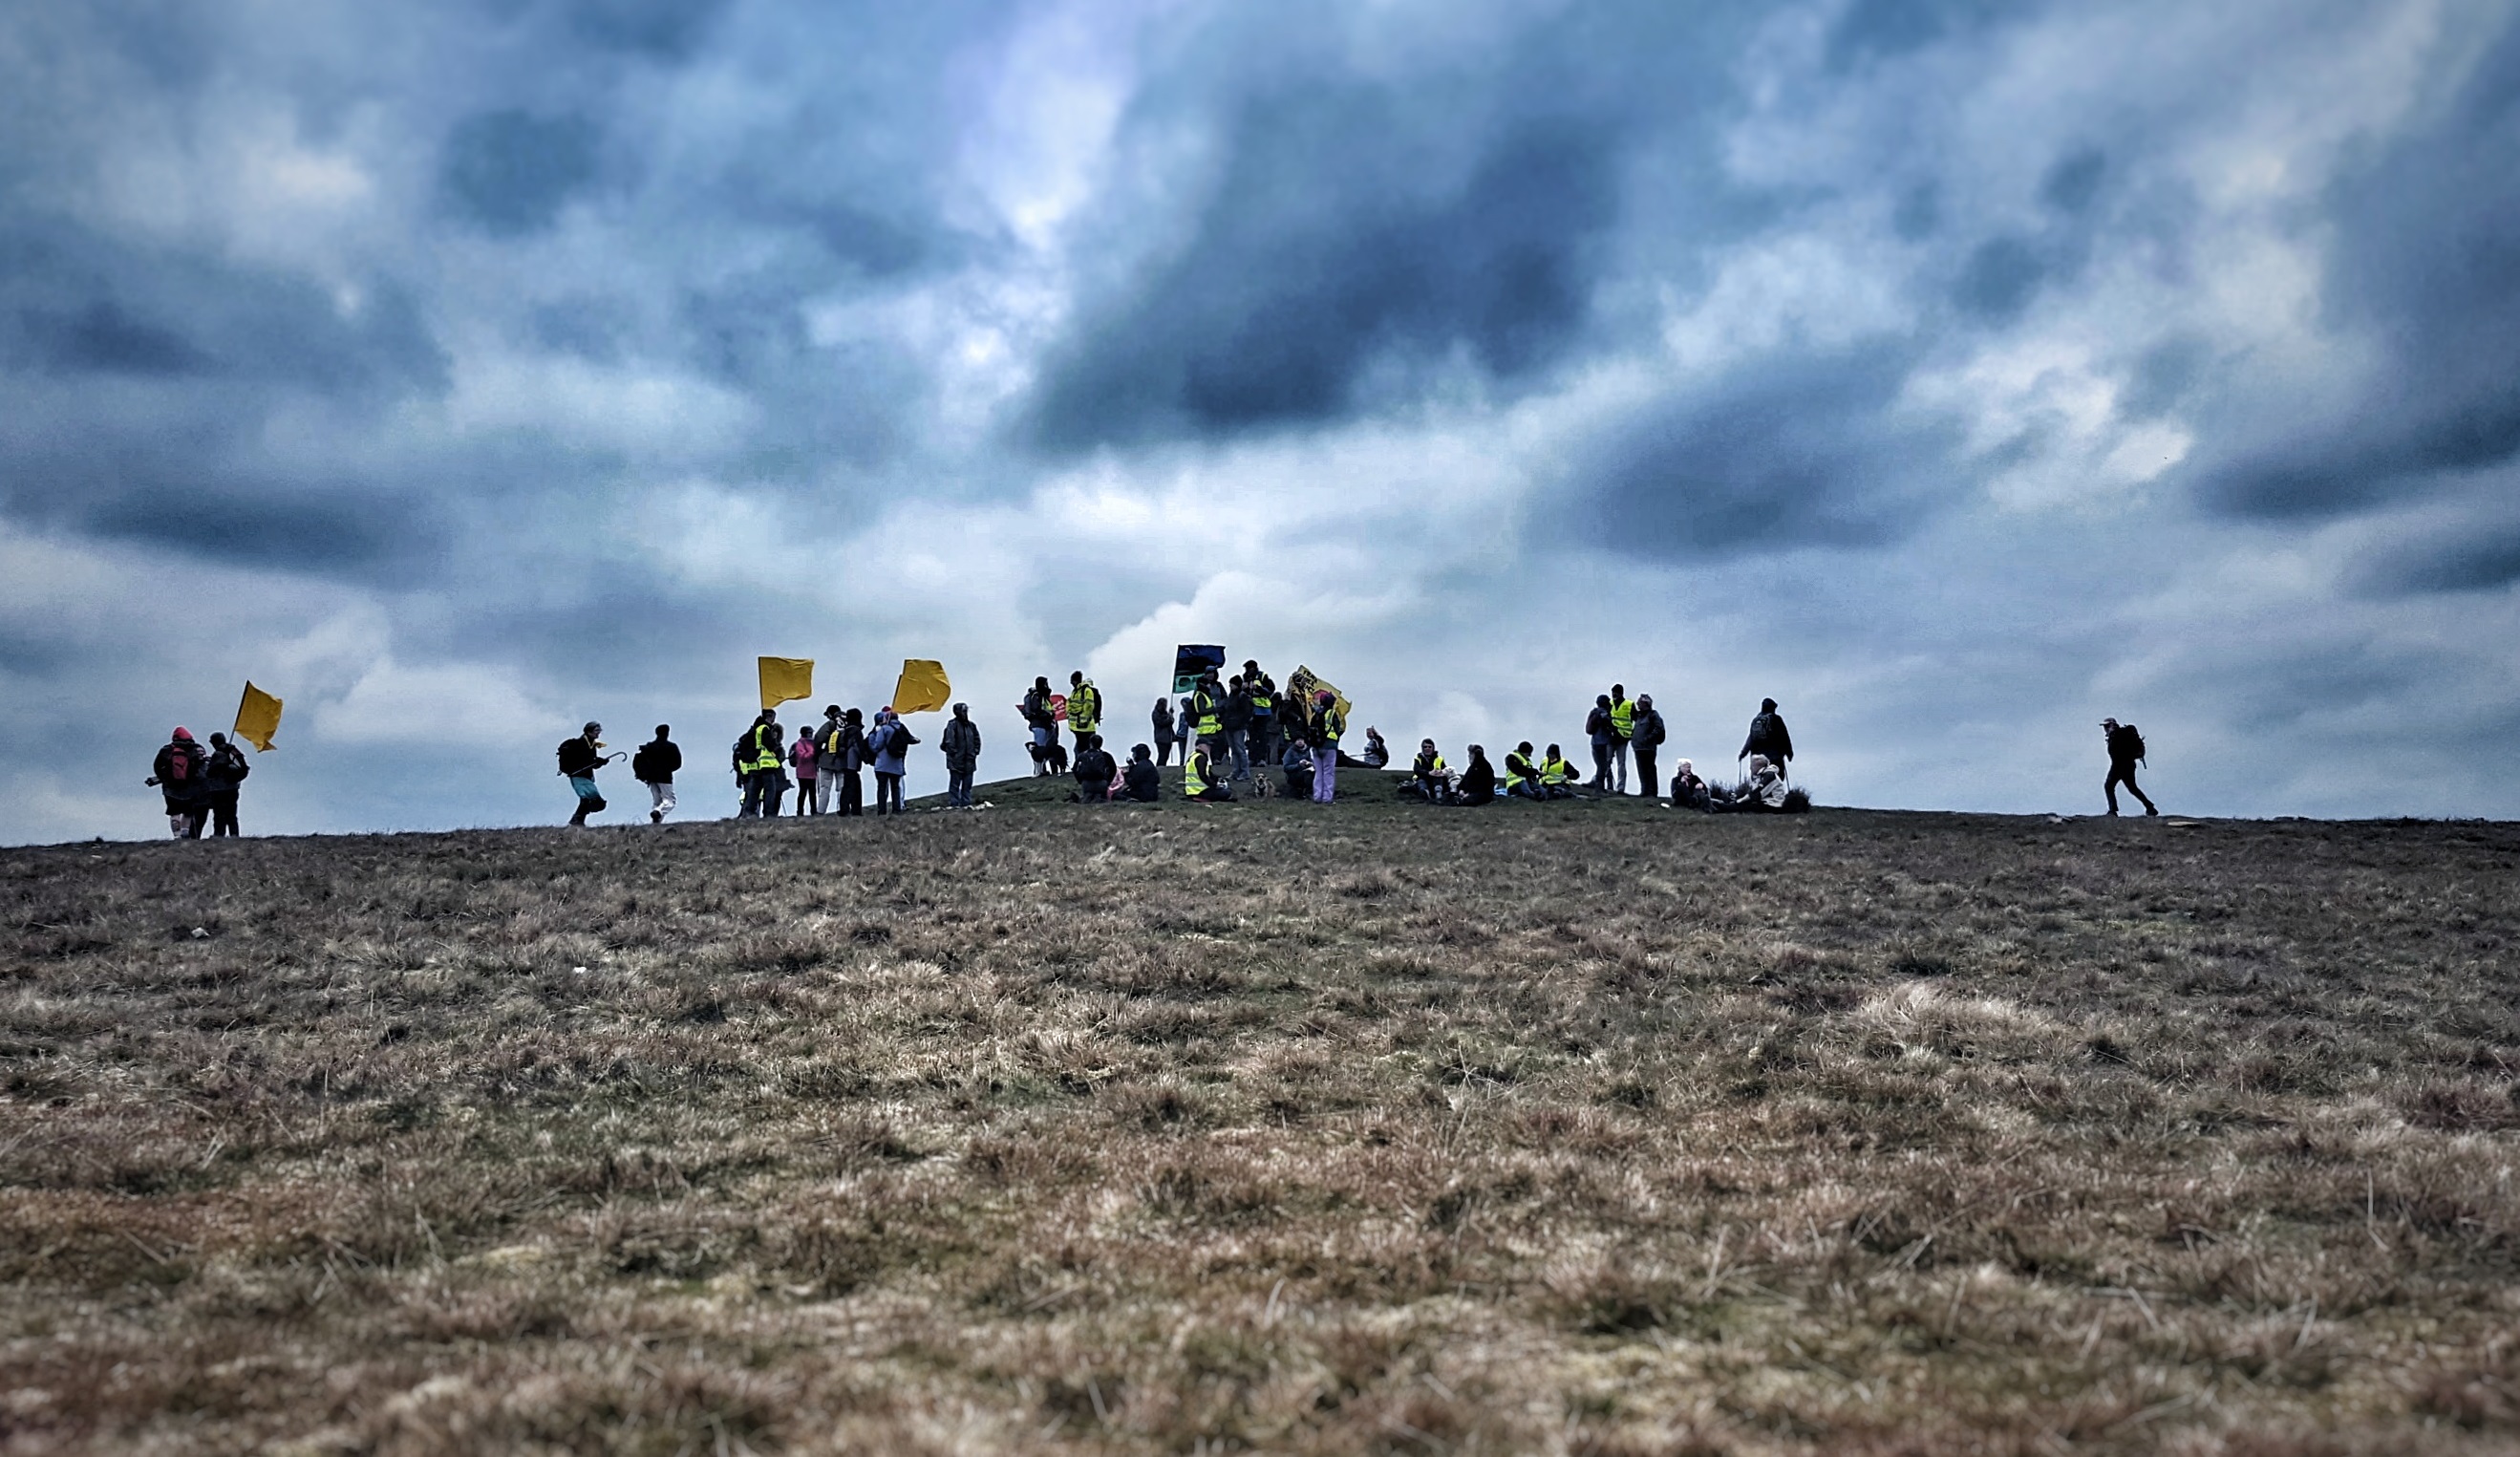 crest of a hill with a dramatic skyline and people gathering at the top